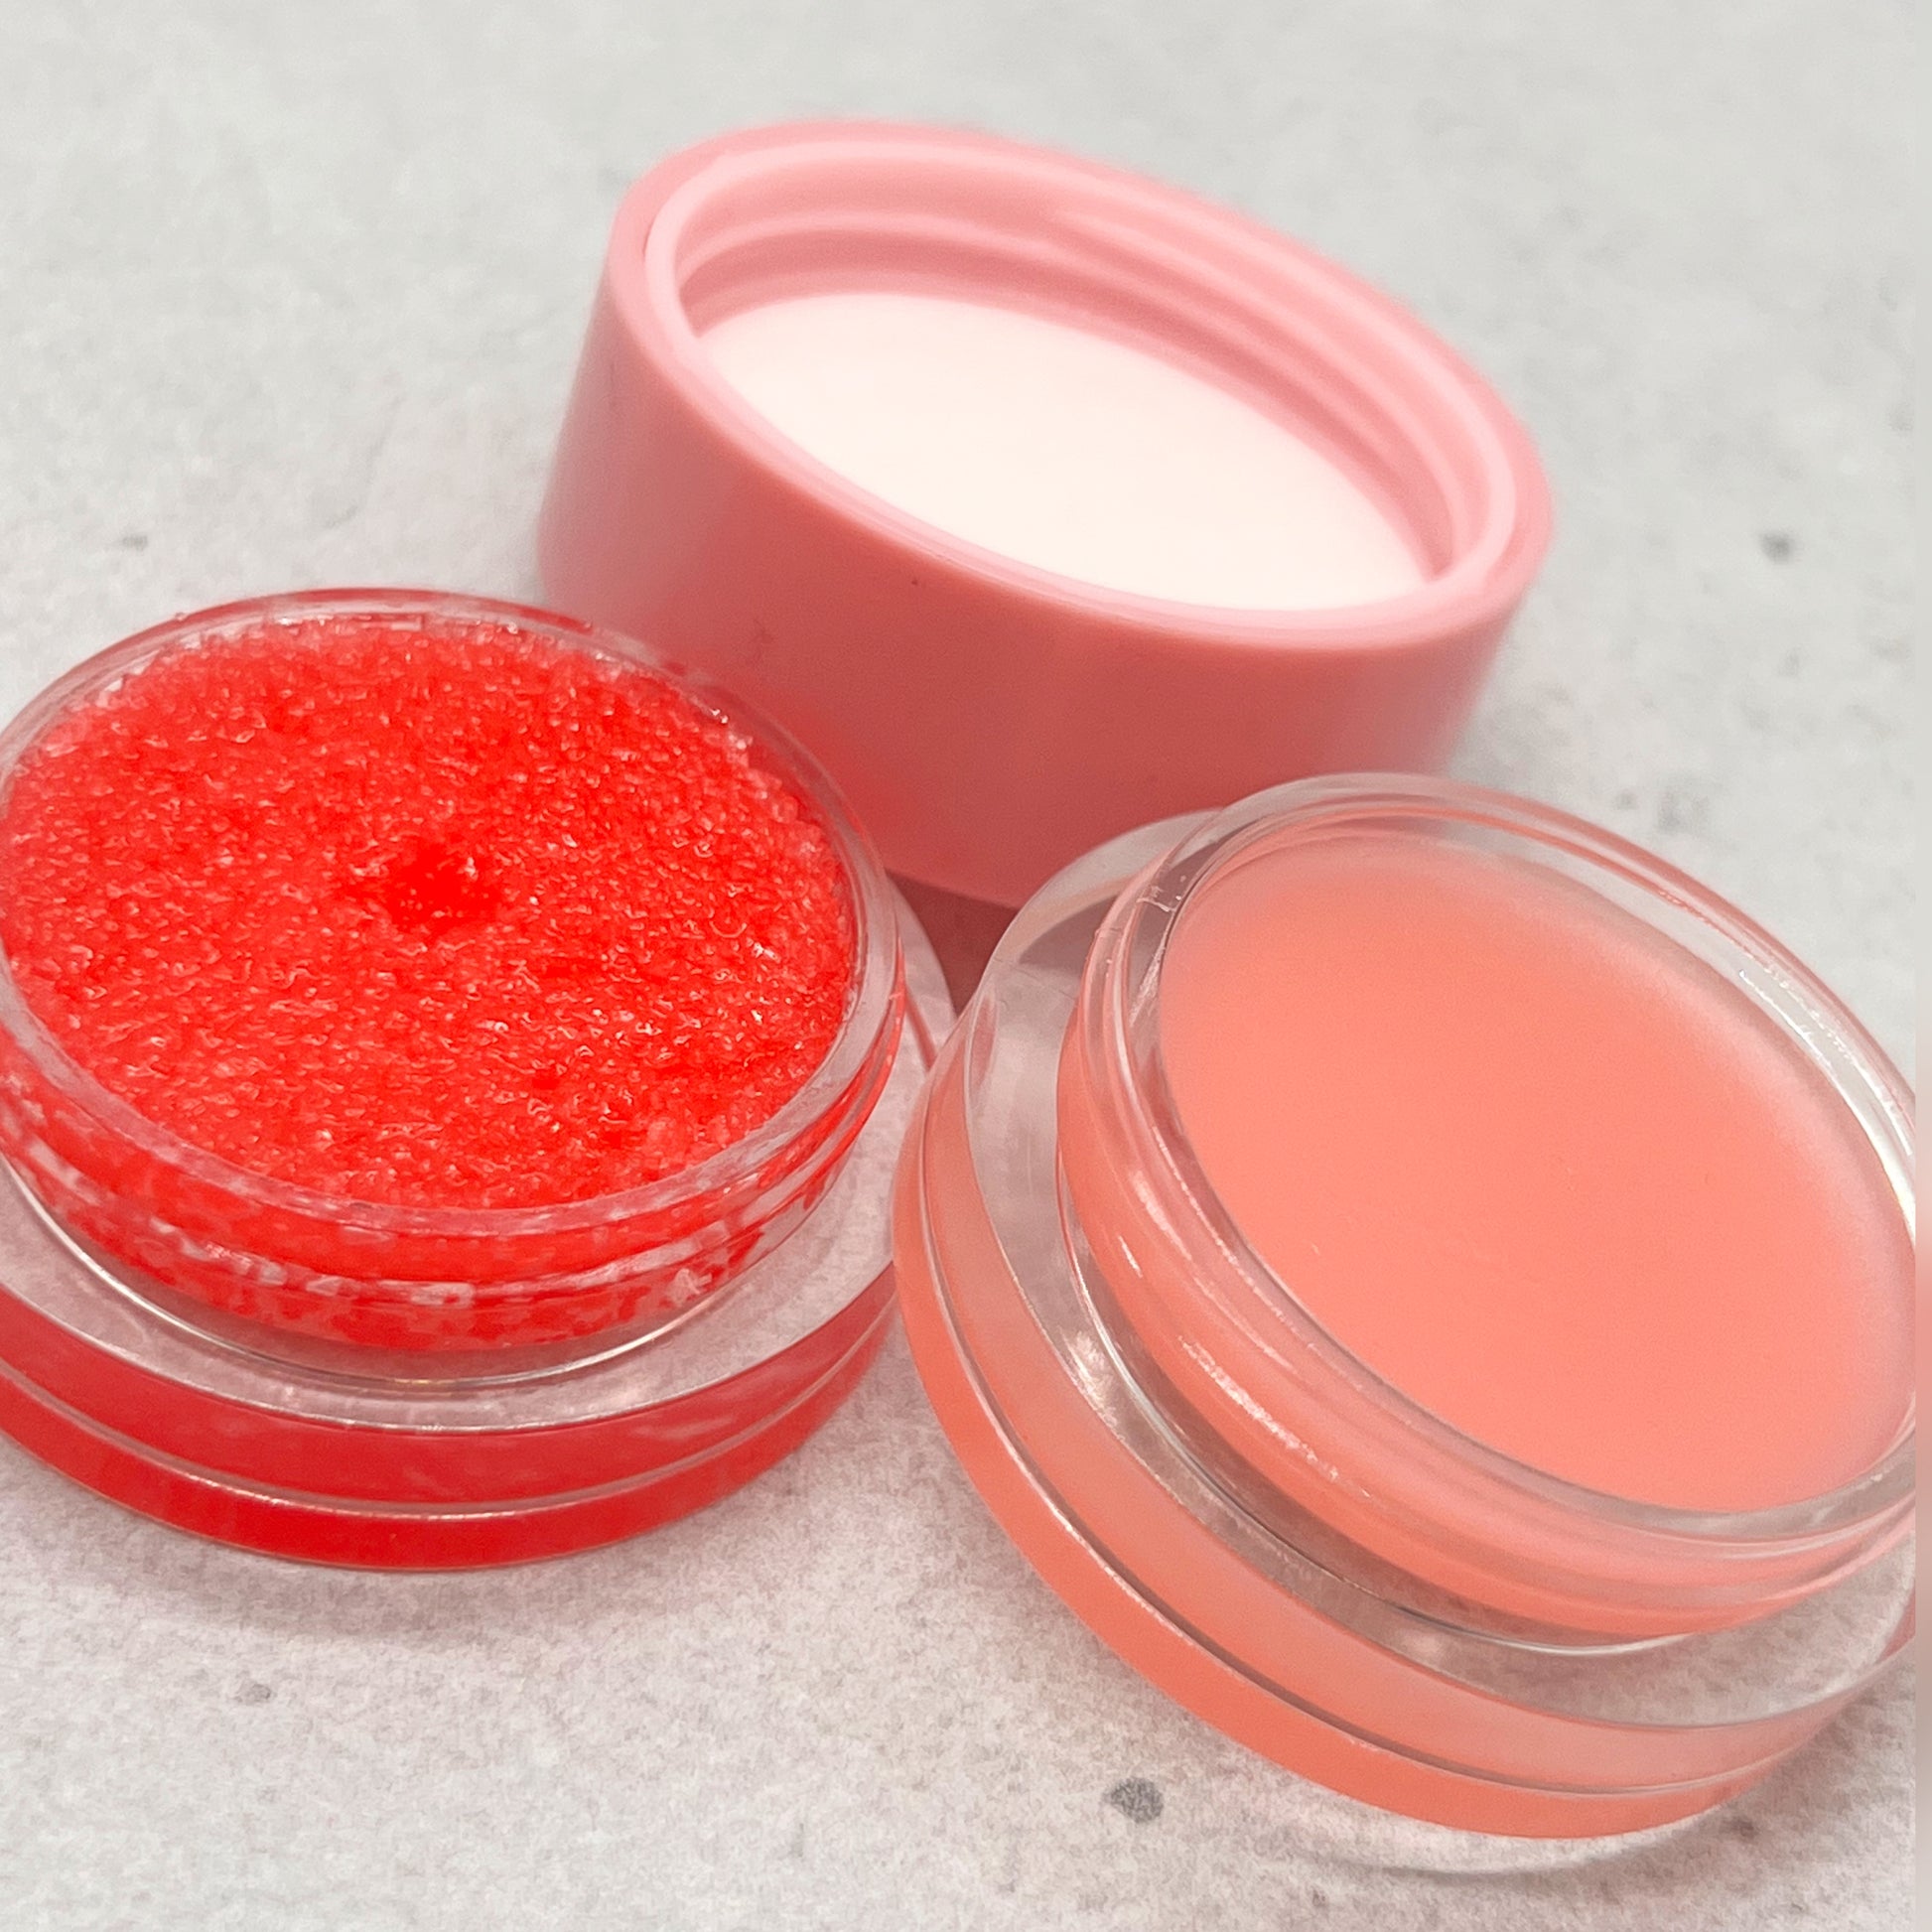 Bold and Luscious Lip Scrub and lip Mask combo up close. on the left, you can see the granulated strawberry scrub in its pot. on the right, you can see the lip mask which is also strawberry.